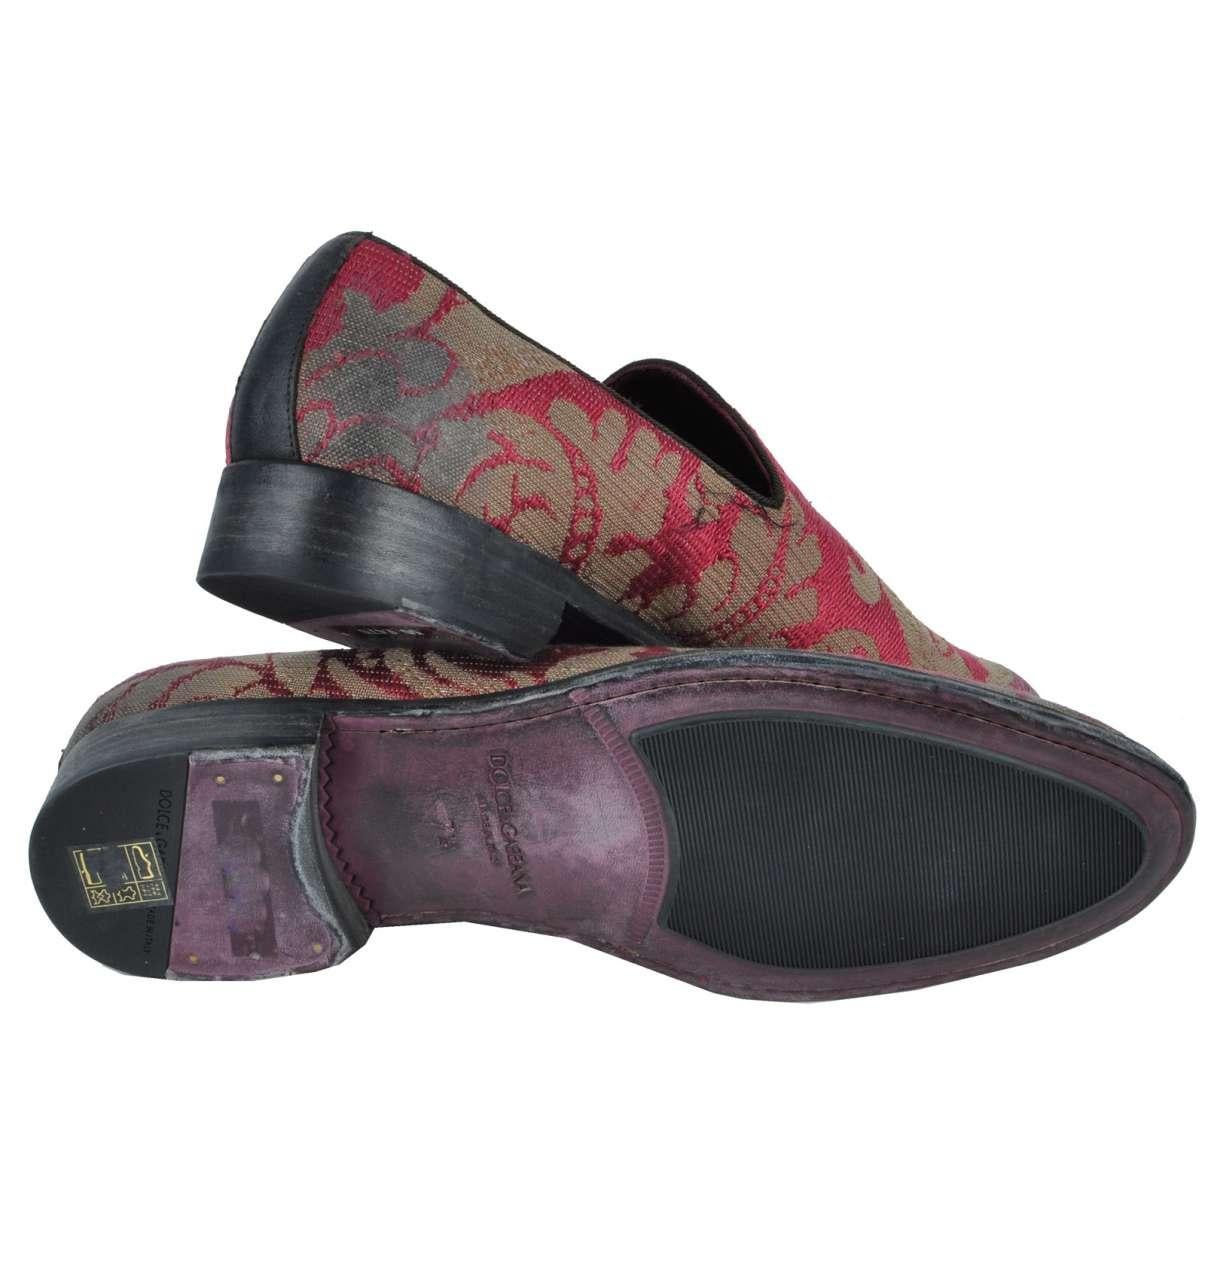 BAROQUE SILK SLIPPER by DOLCE & GABBANA Black Label RUNWAY - DOLCE&GABBANA Fashion Show MADE IN ITALY Former RRP: EUR 500 NEW with Box or Dustbag MODELL: CA5290 MATERIAL: 80% Silk, 10% Cotton, 8% Viscose, 2% Calf Leather INSIDE: 100% Leather SOLE: